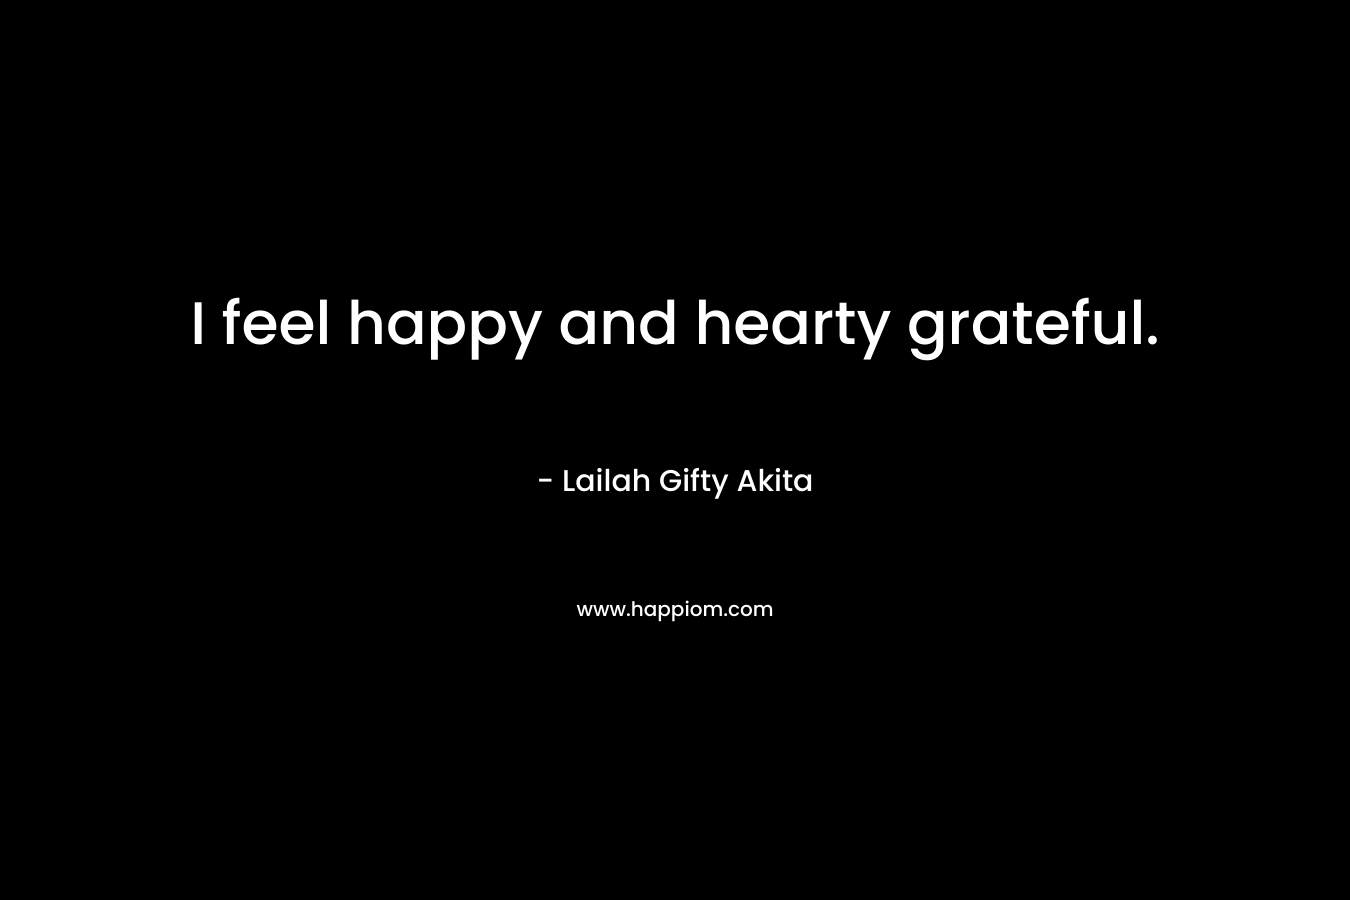 I feel happy and hearty grateful. – Lailah Gifty Akita